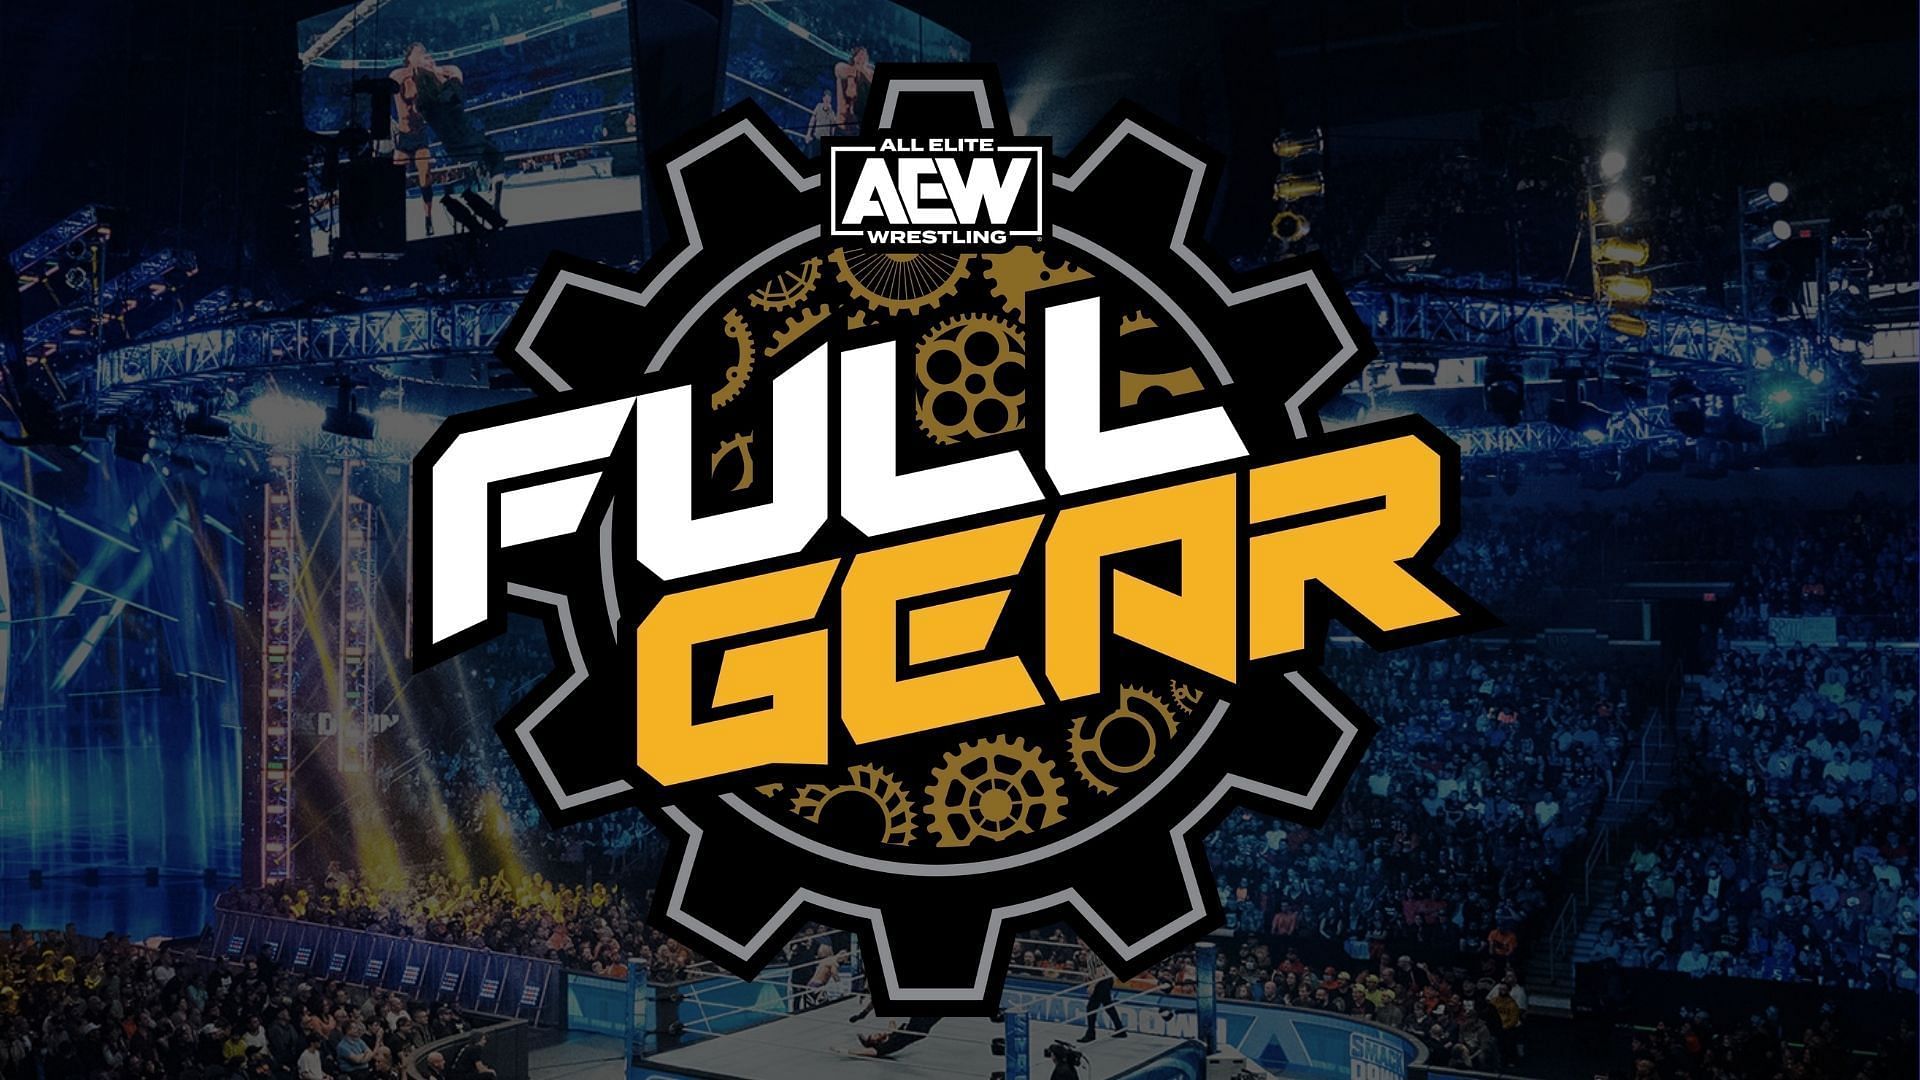 AEW Full Gear takes place on November 18.